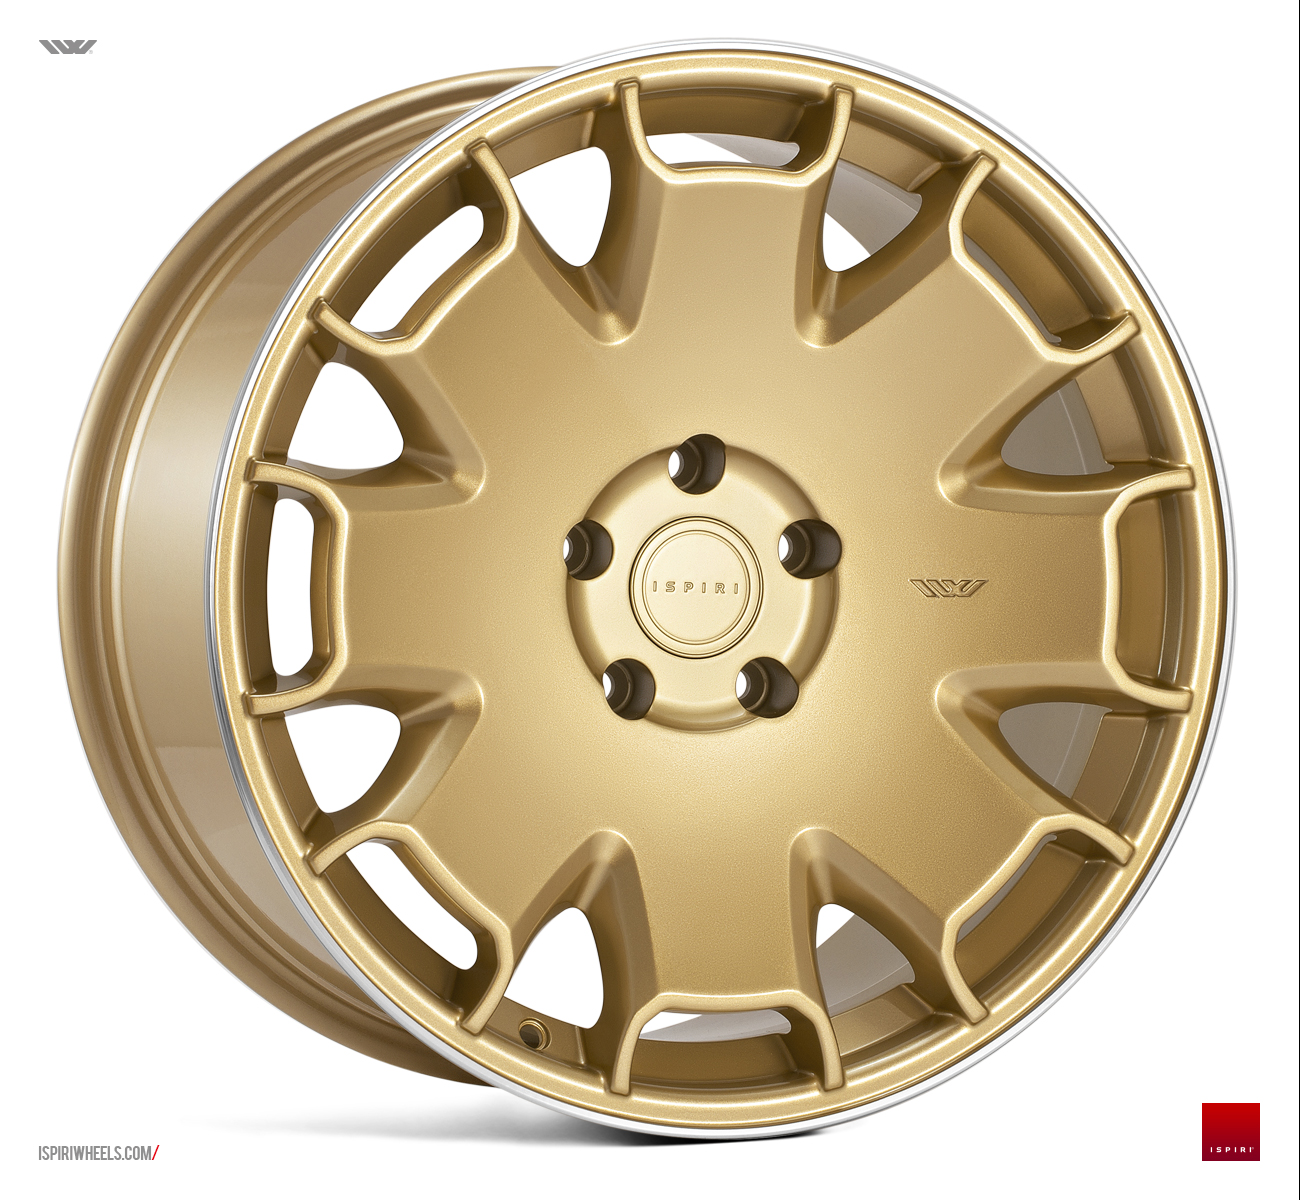 NEW 18" ISPIRI CSR2 ALLOY WHEELS IN VINTAGE GOLD WITH POLISHED LIP et42/42